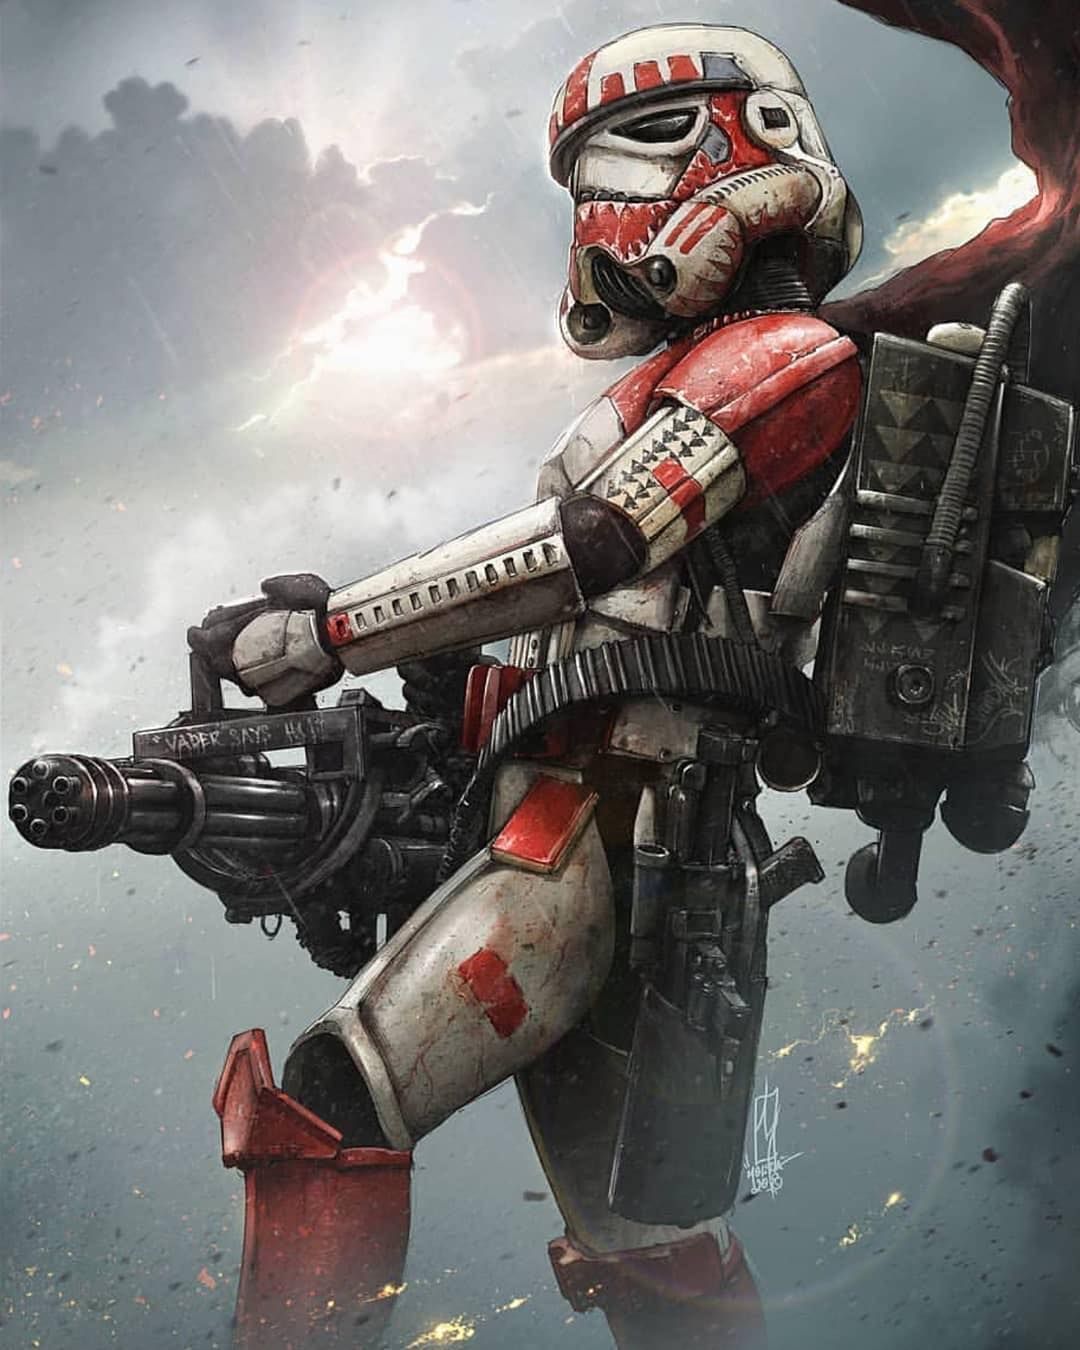 Star Wars Stormtroopers on Instagram: Q: Do you love the Shock Trooper? Wars Mandalorian of. Star wars picture, Star wars rpg, Star wars image